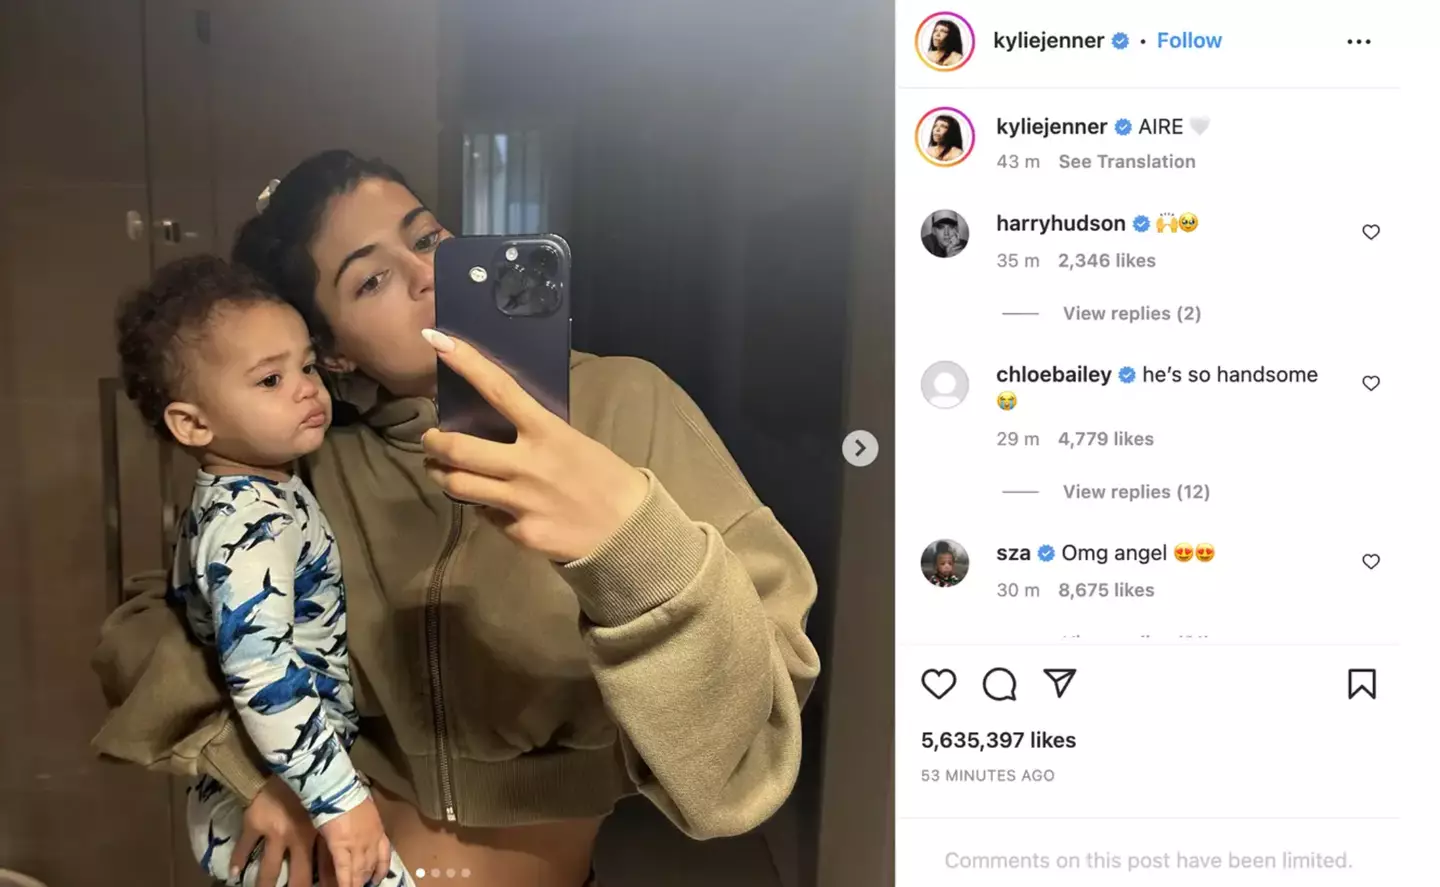 Kylie Jenner kept fans waiting for months before revealing her son's name.